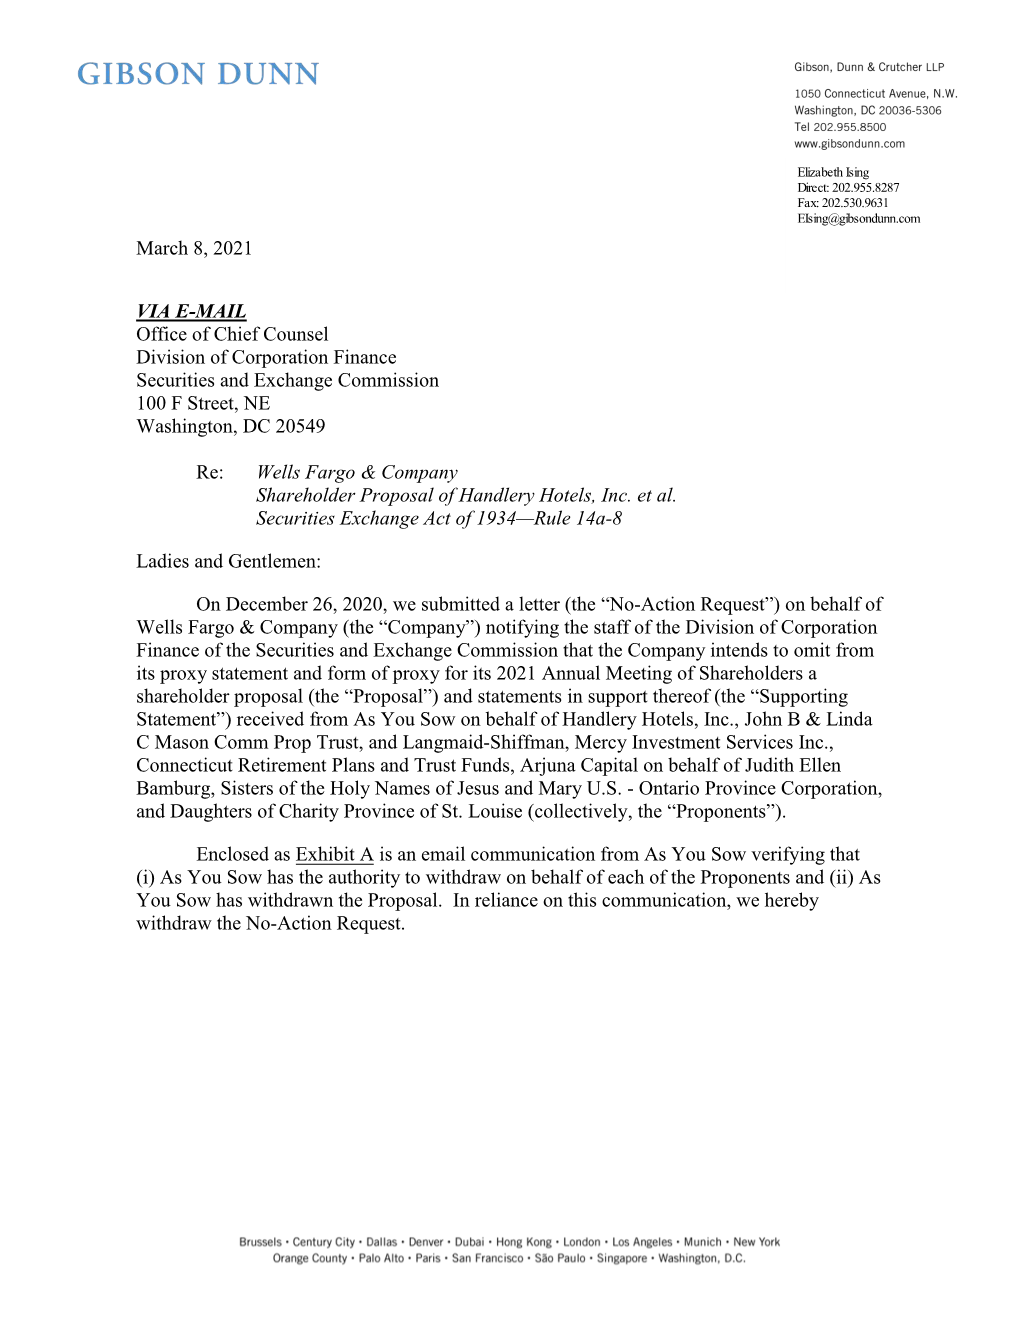 Wells Fargo & Company; Rule 14A-8 No-Action Letter